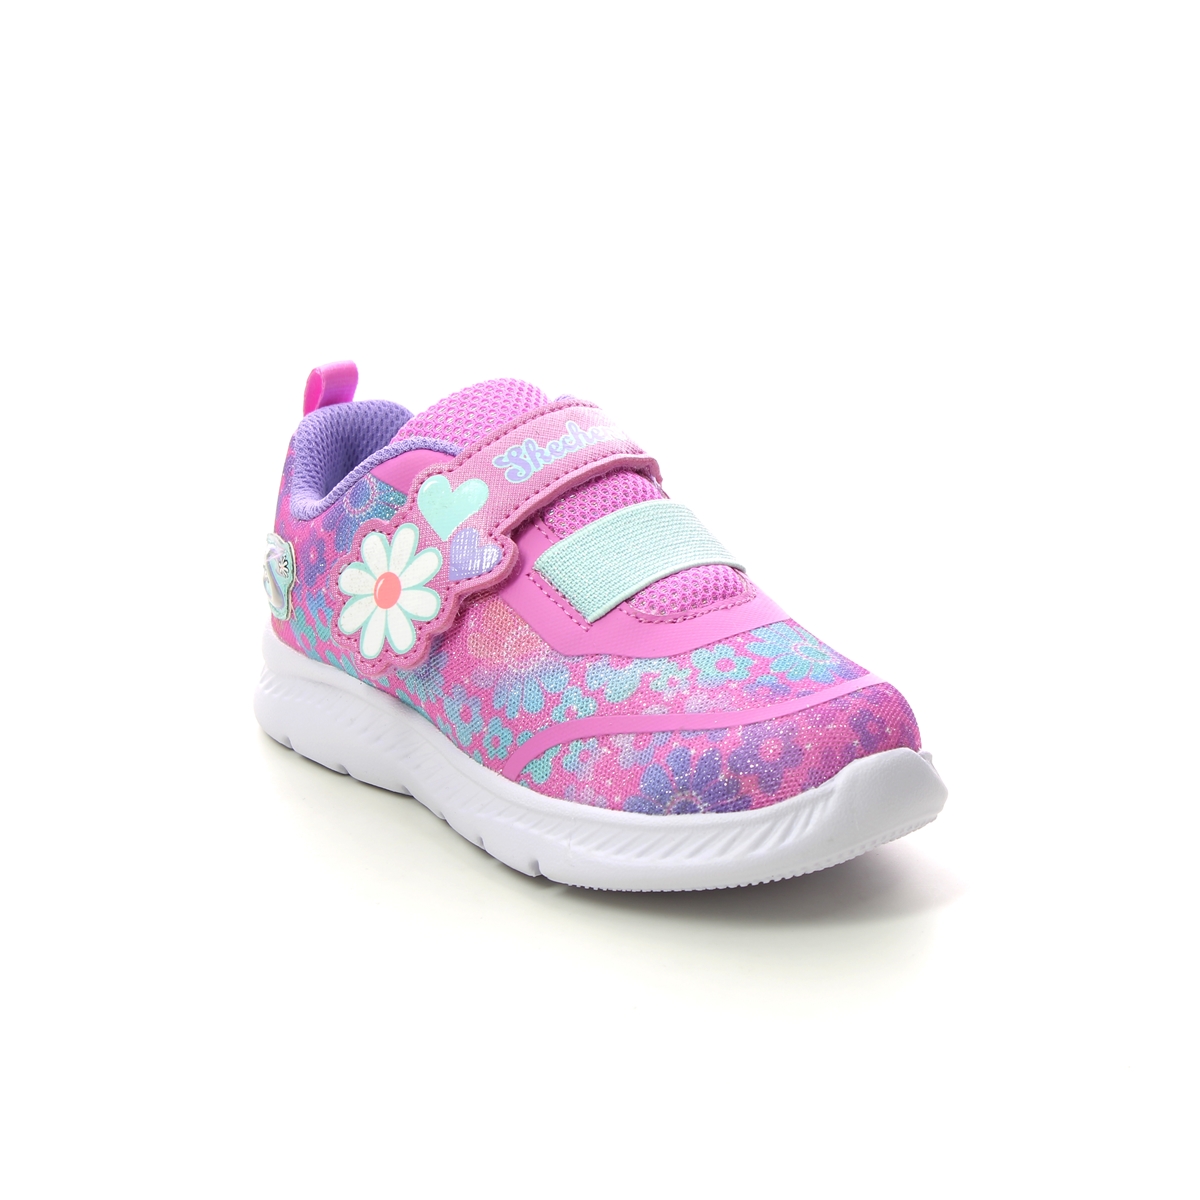 Skechers Comfy Flex 2.0 Pink Kids Girls Trainers 302717N In Size 26 In Plain Pink For kids